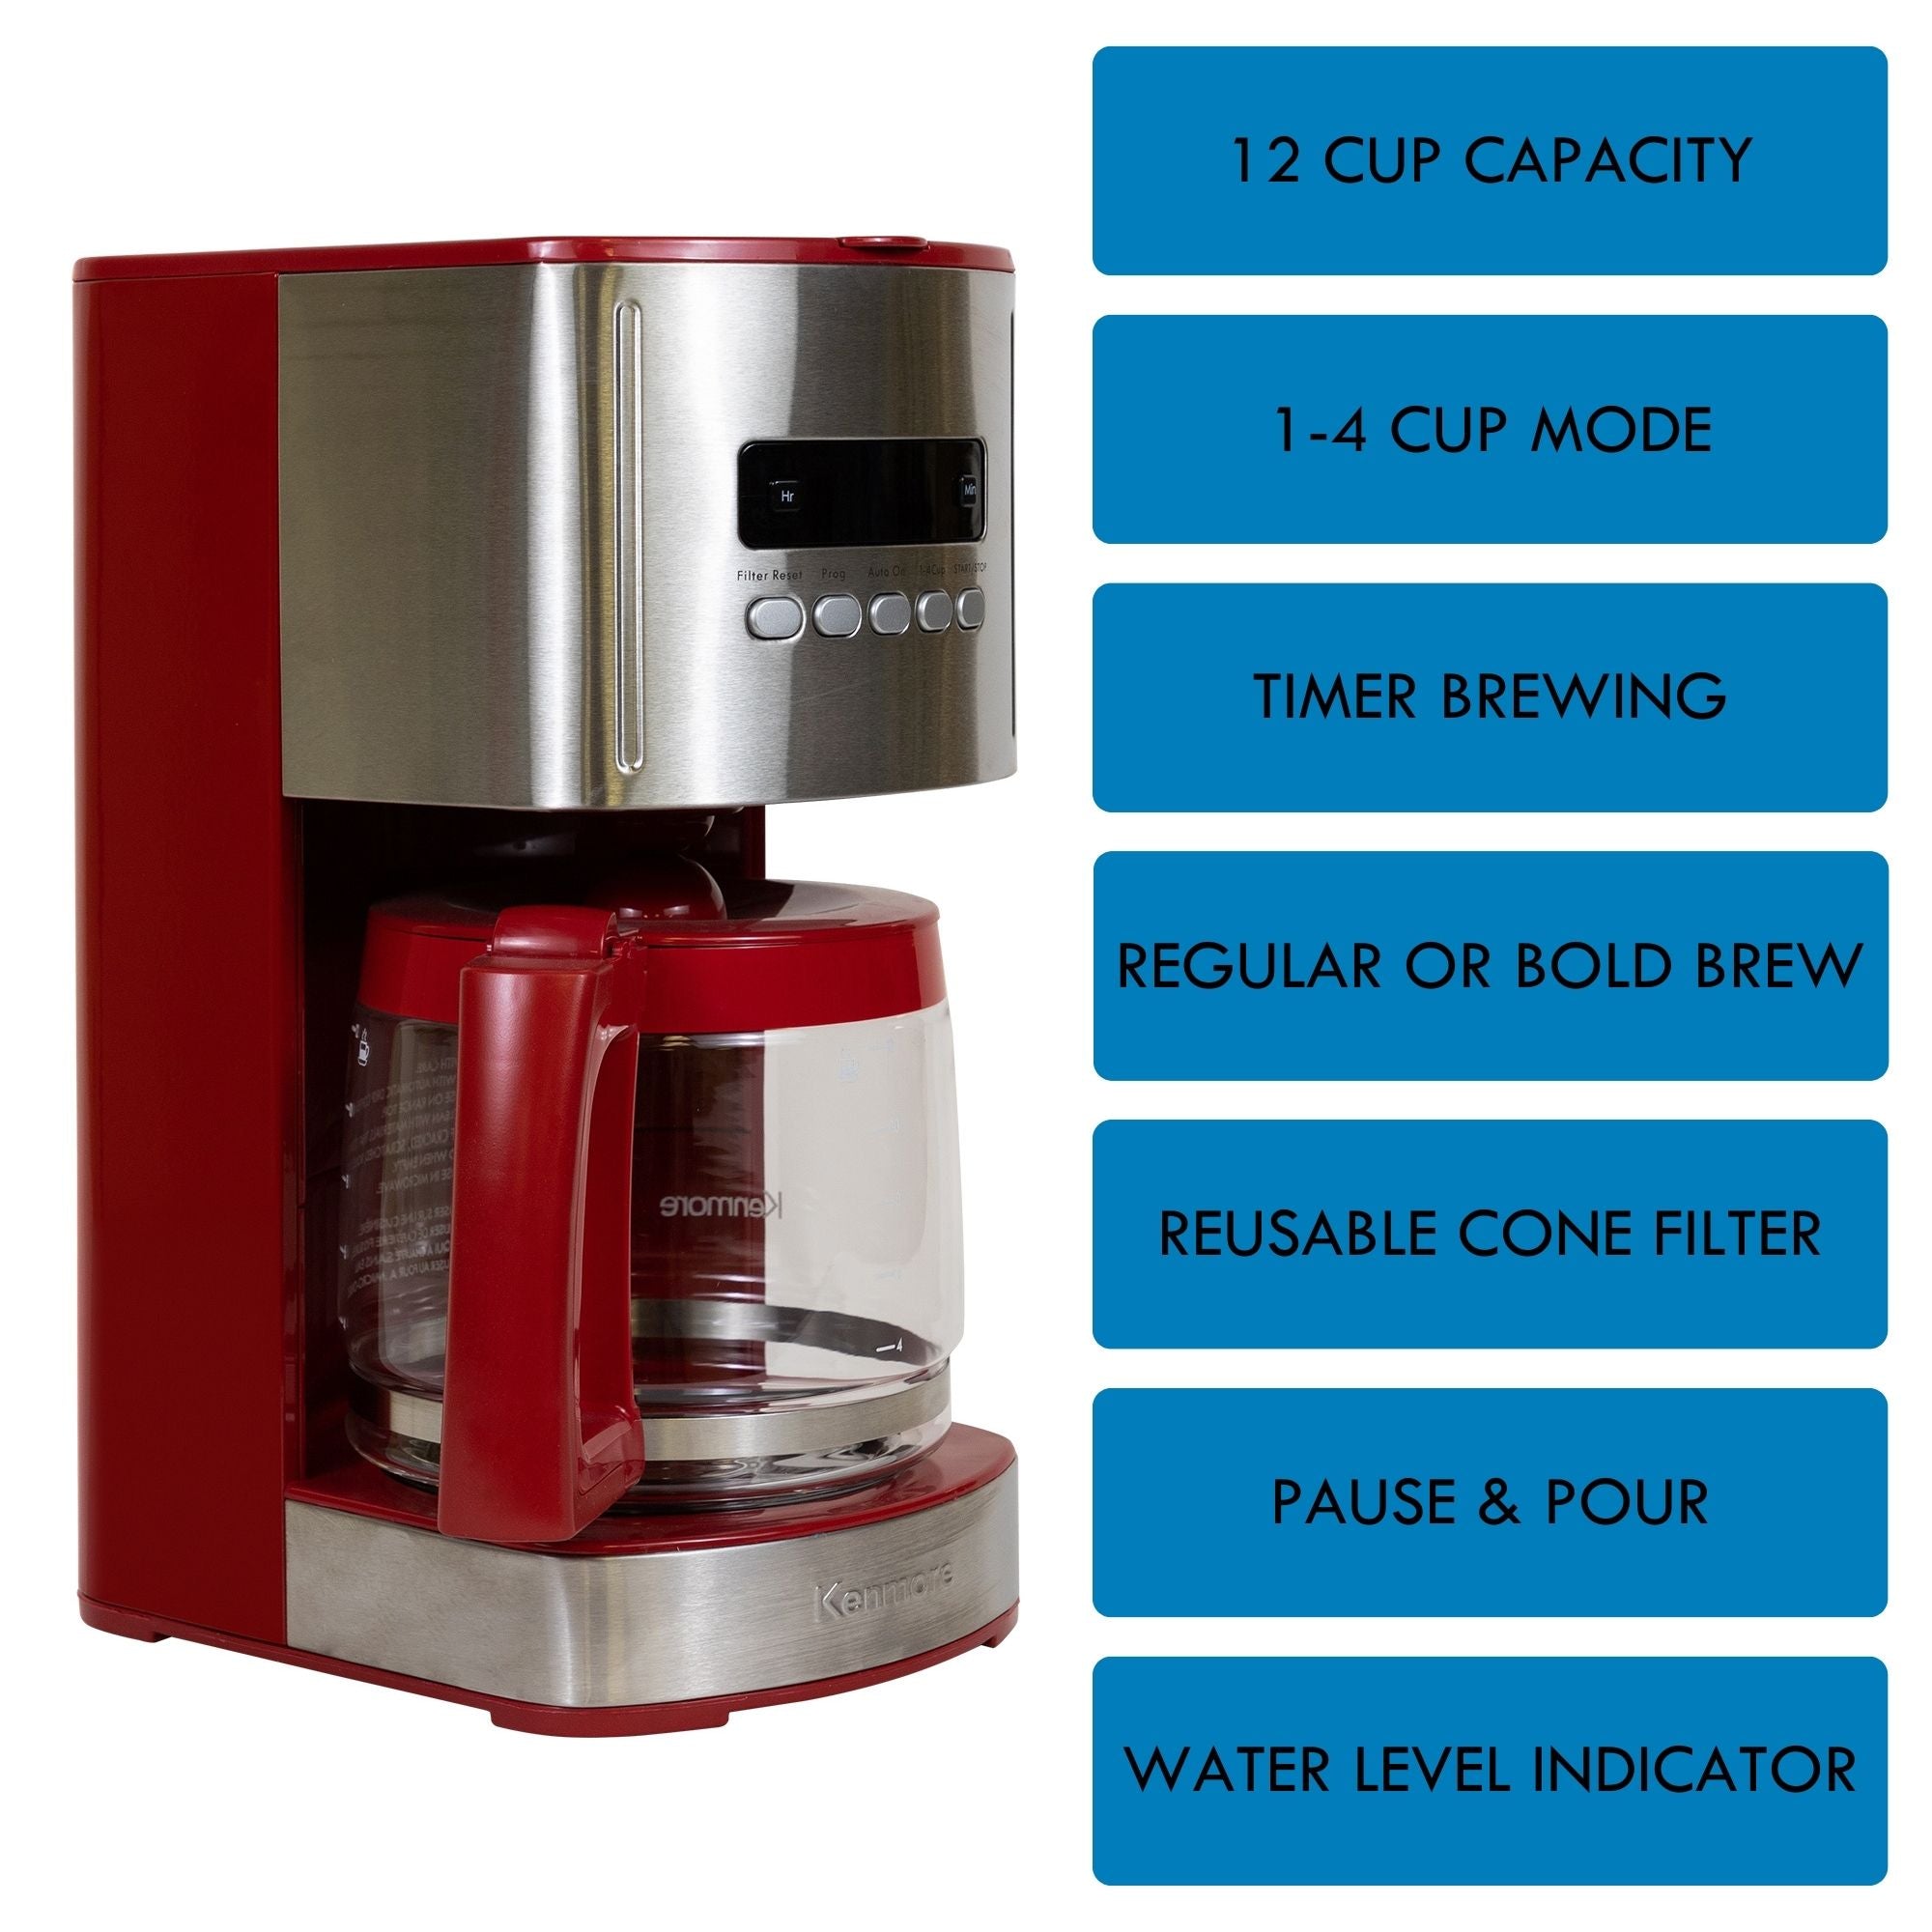 Kenmore Aroma Control 12-Cup Programmable Coffee Maker, Red and Stainless  Steel Drip Coffee Machine, Glass Carafe, Reusable Filter, Timer, Digital